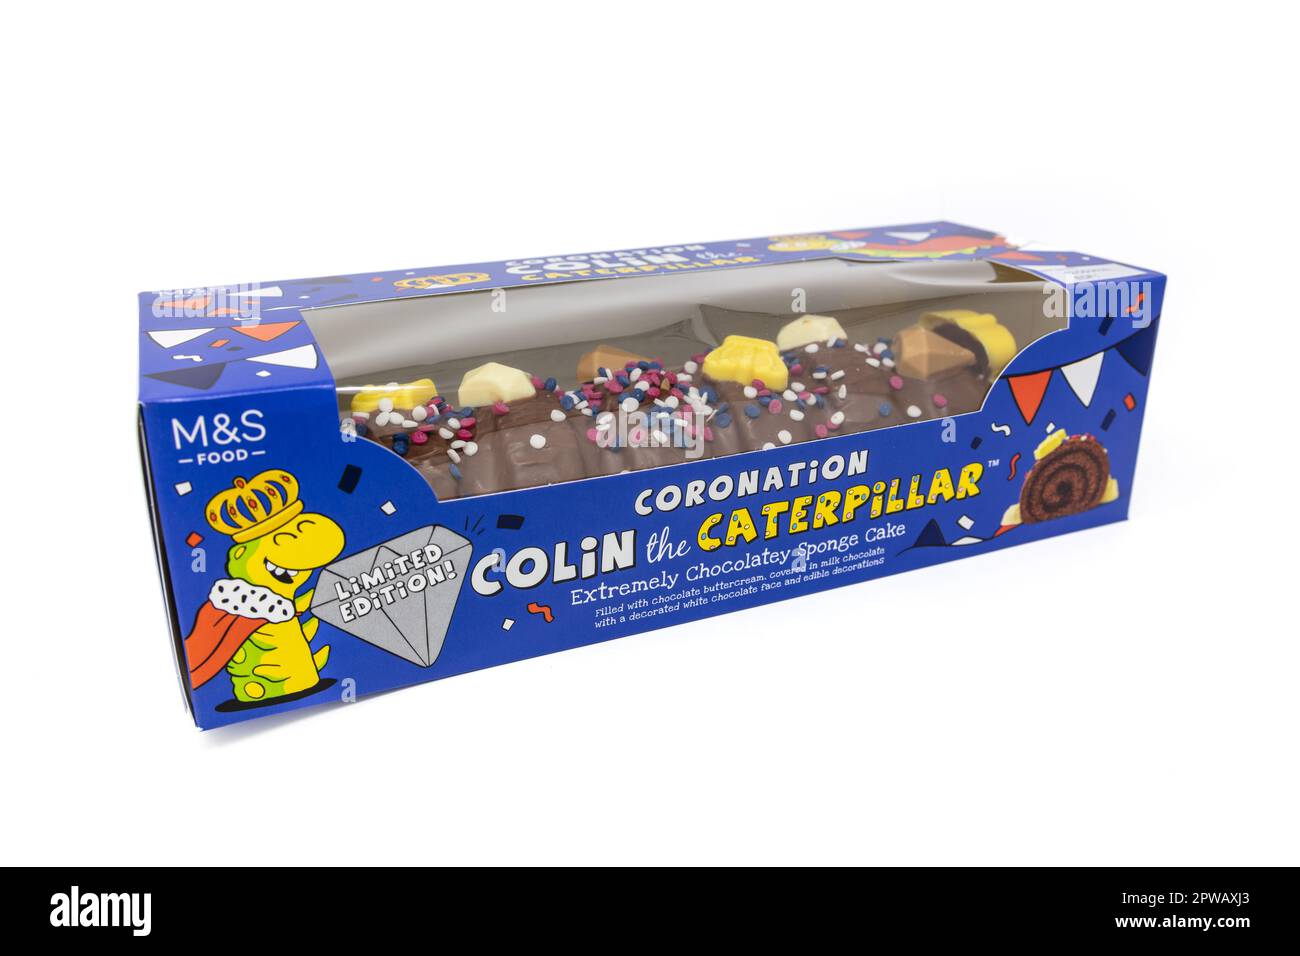 M&S Coronation Colin The Caterpillar Cake Banque D'Images